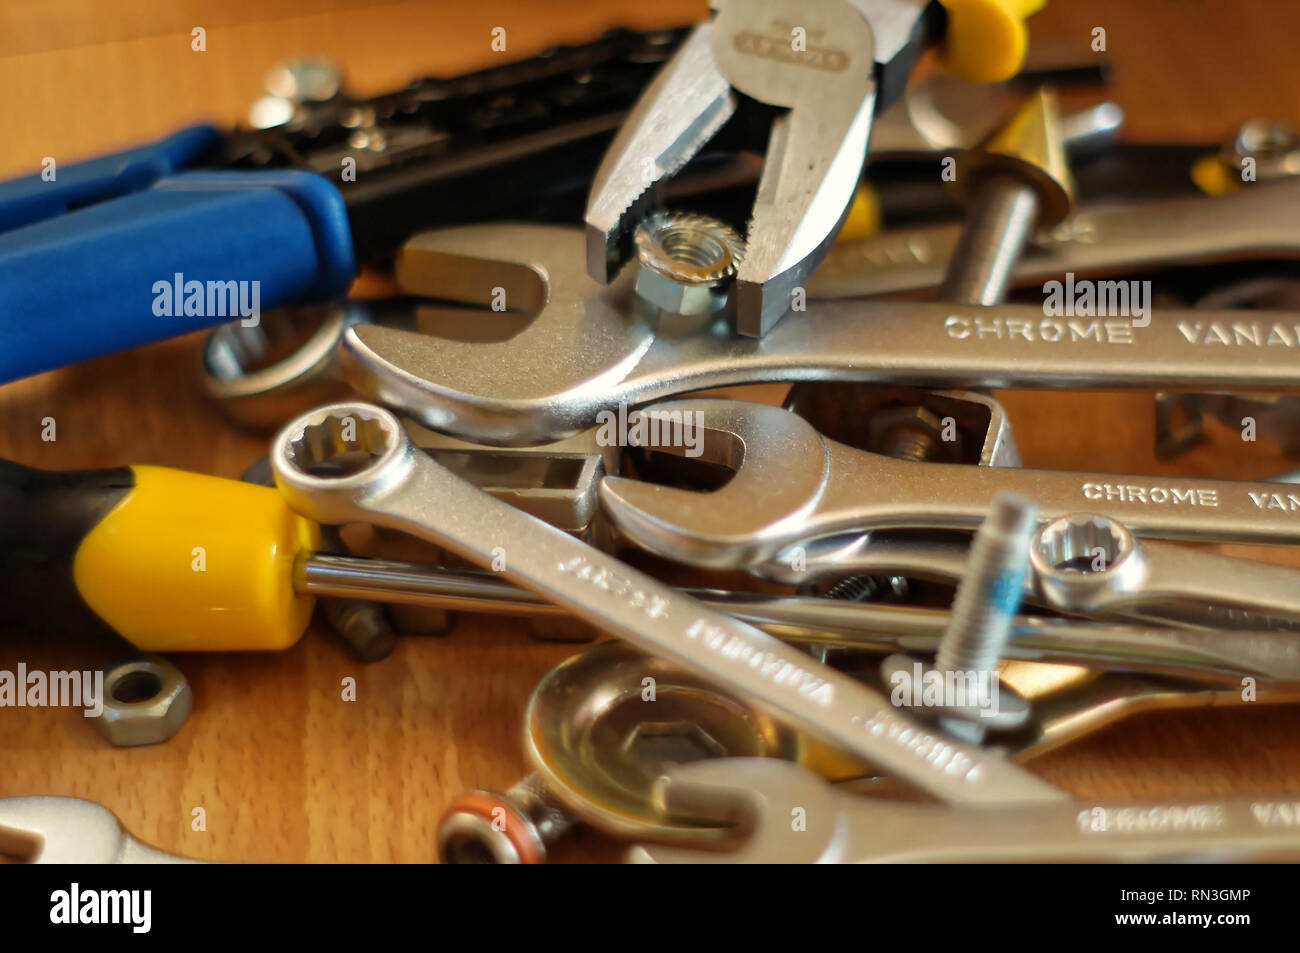 Do It Yourself DIY accessories - locksmith tools, wrenches, screwdrivers, pliers, nuts and bolts on a wooden table Stock Photo